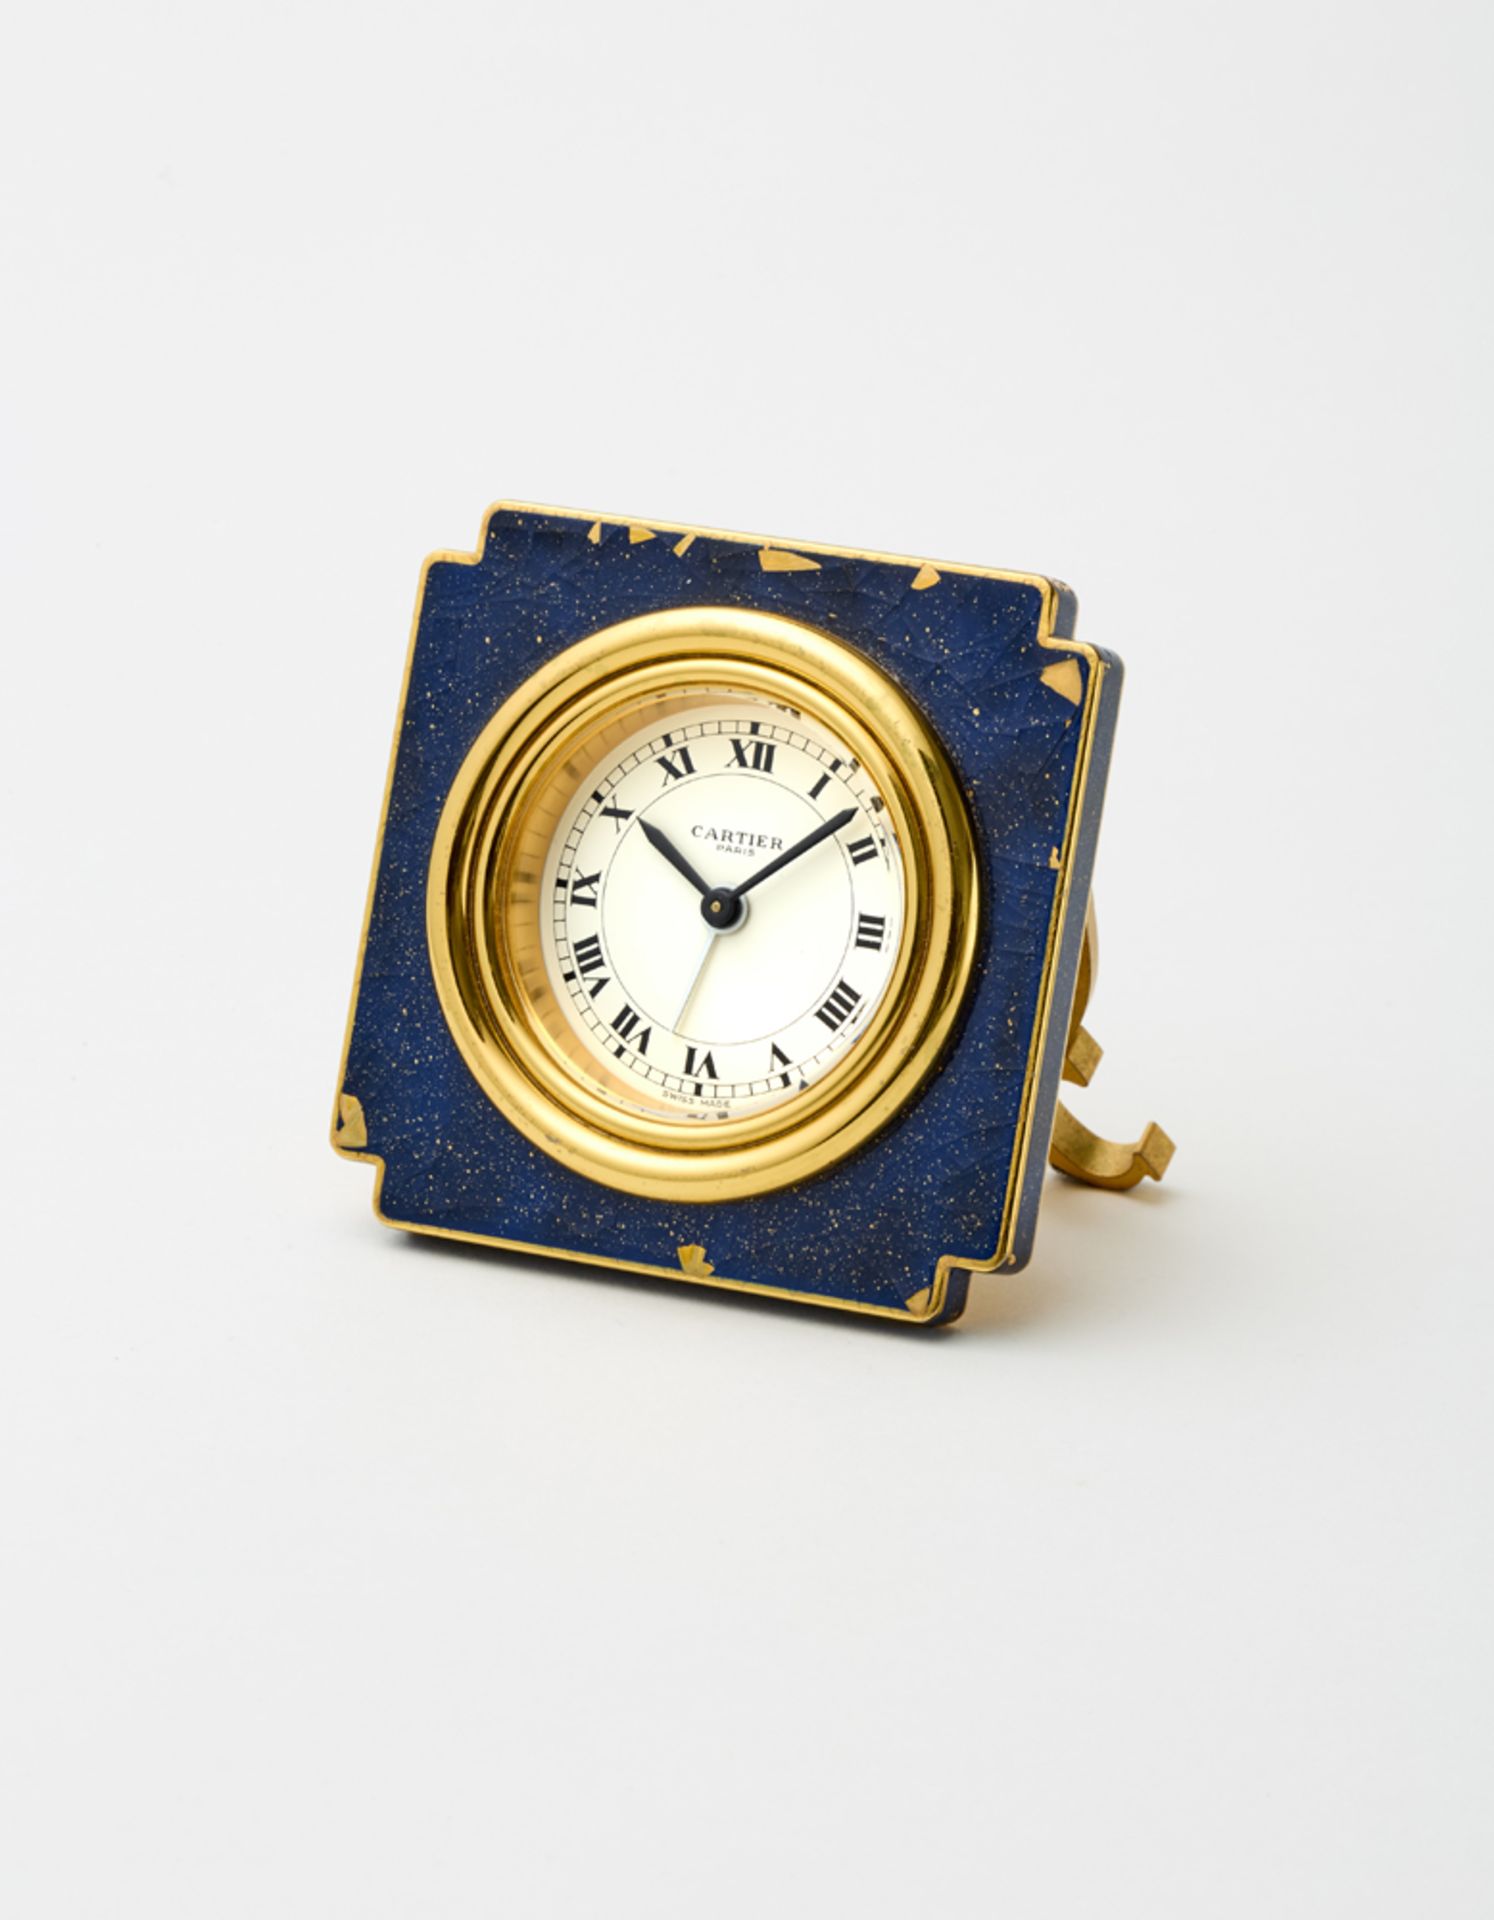 CARTIERLacquered gilt brass alarm clock with square-shaped case with mechanical movement.70s of